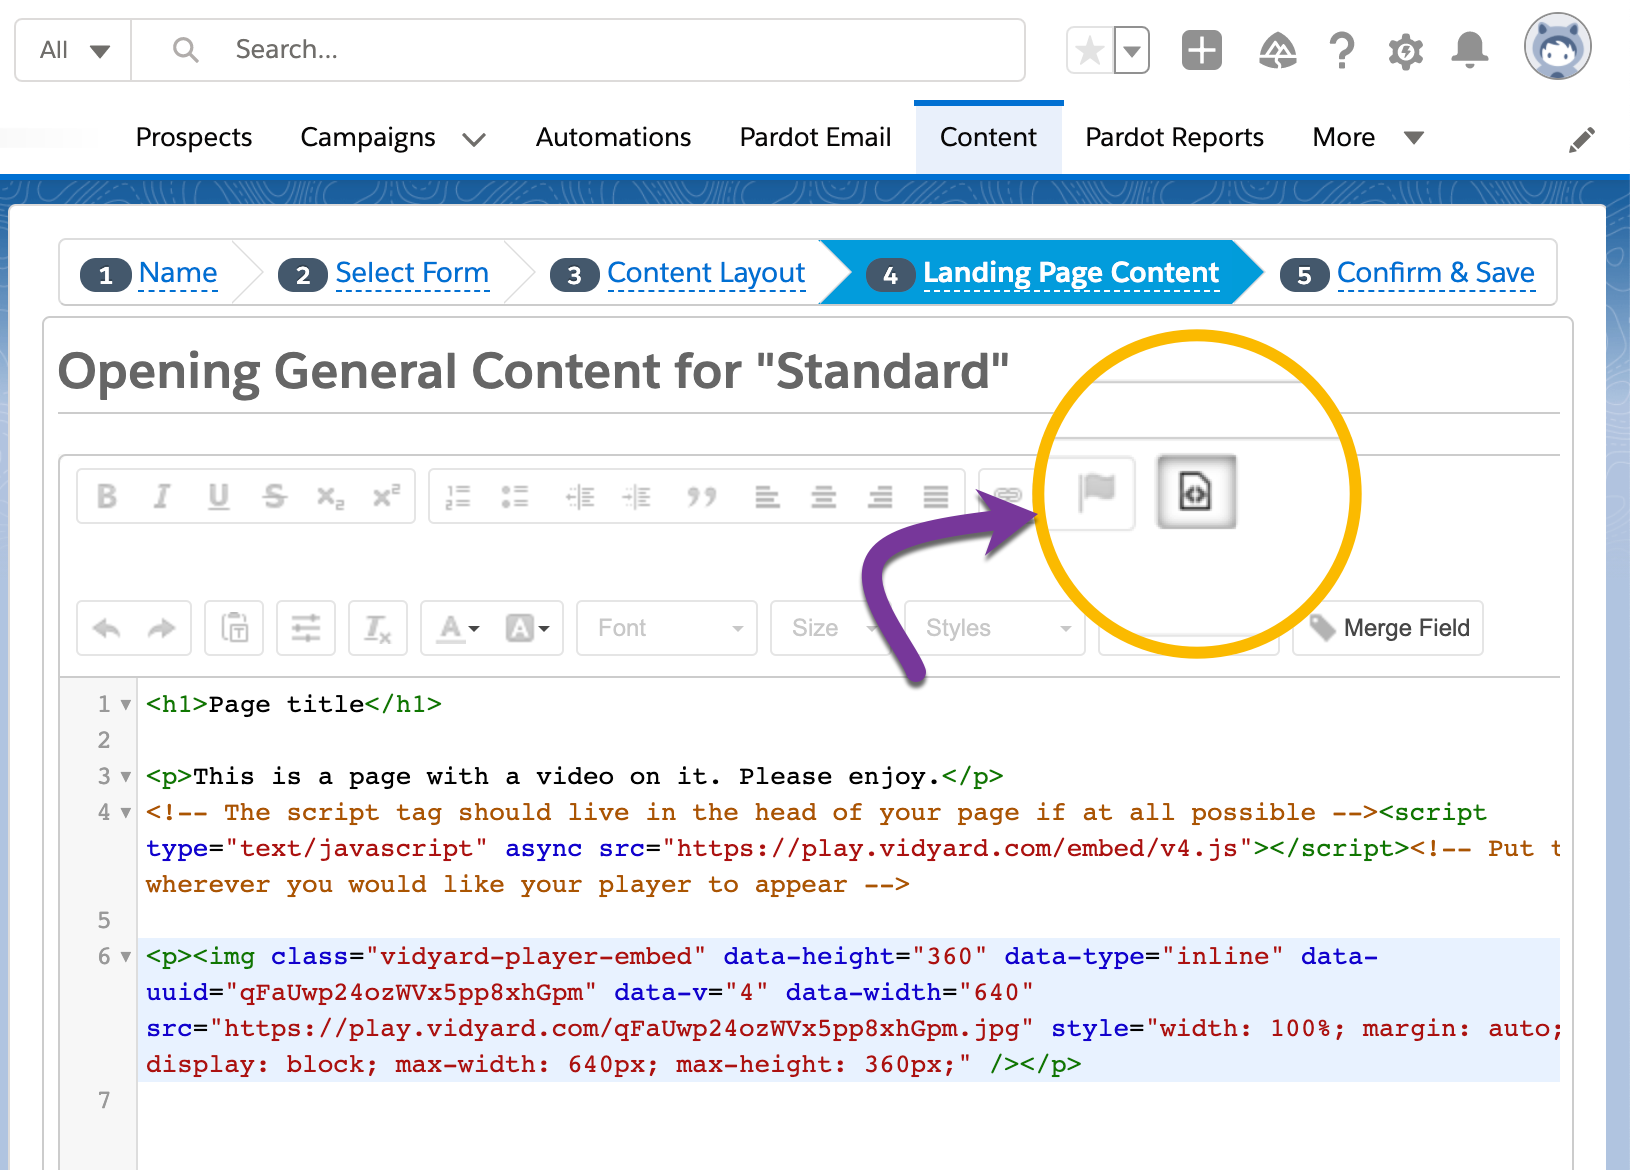 Pasting the embed code for your video into the page source